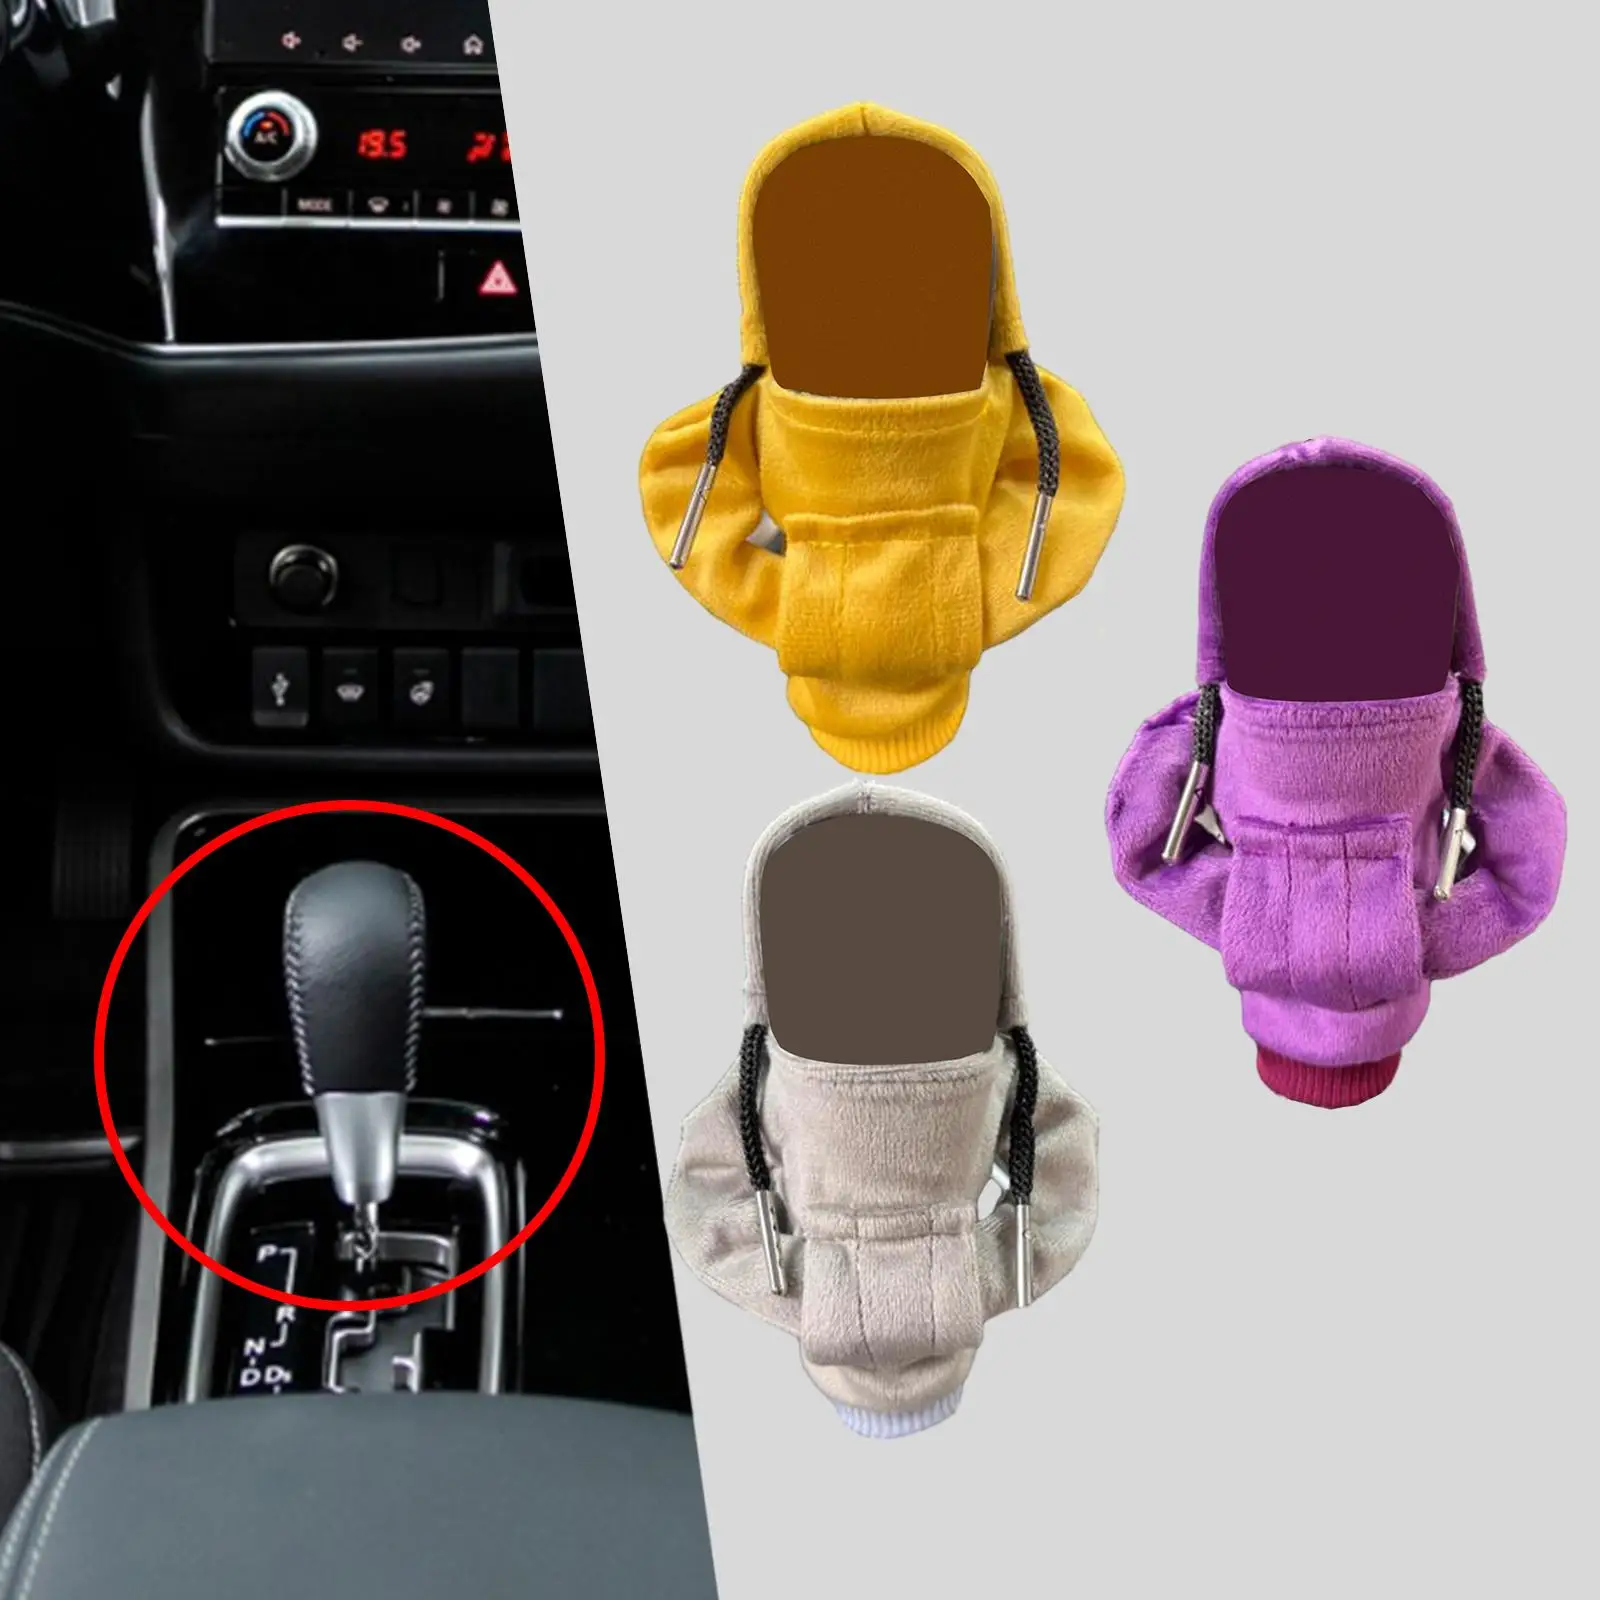 Car Shifter Knob Cover Fashion Hoodies Gift Sweatshirt Car Interior Accessories Gear Shifter Hoodie Cover for Vehicles